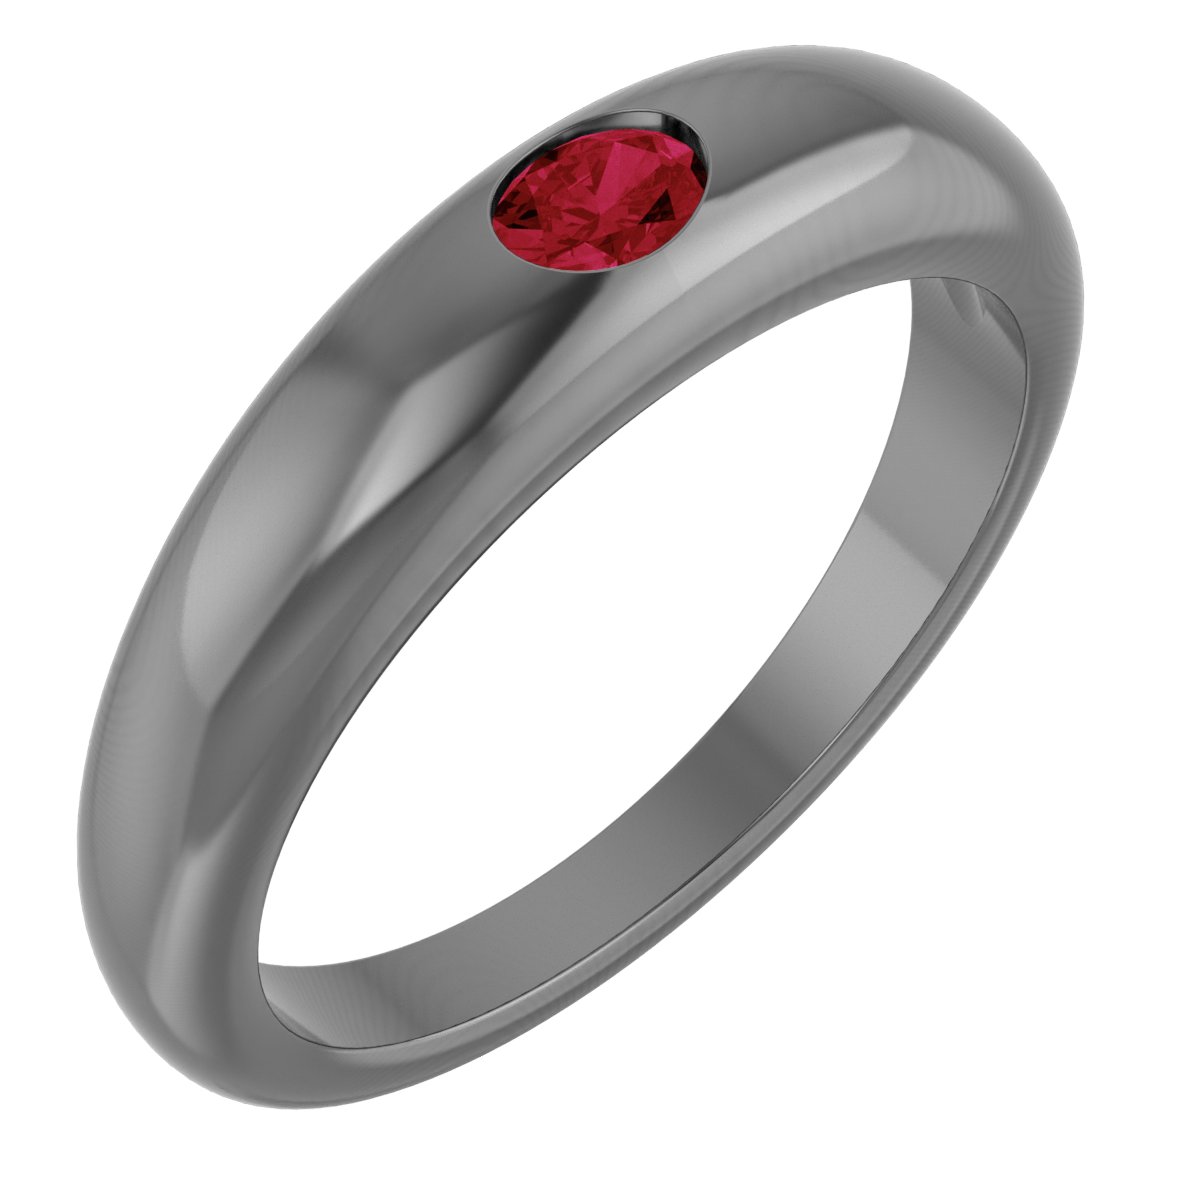 14K White Natural Ruby Dome Ring